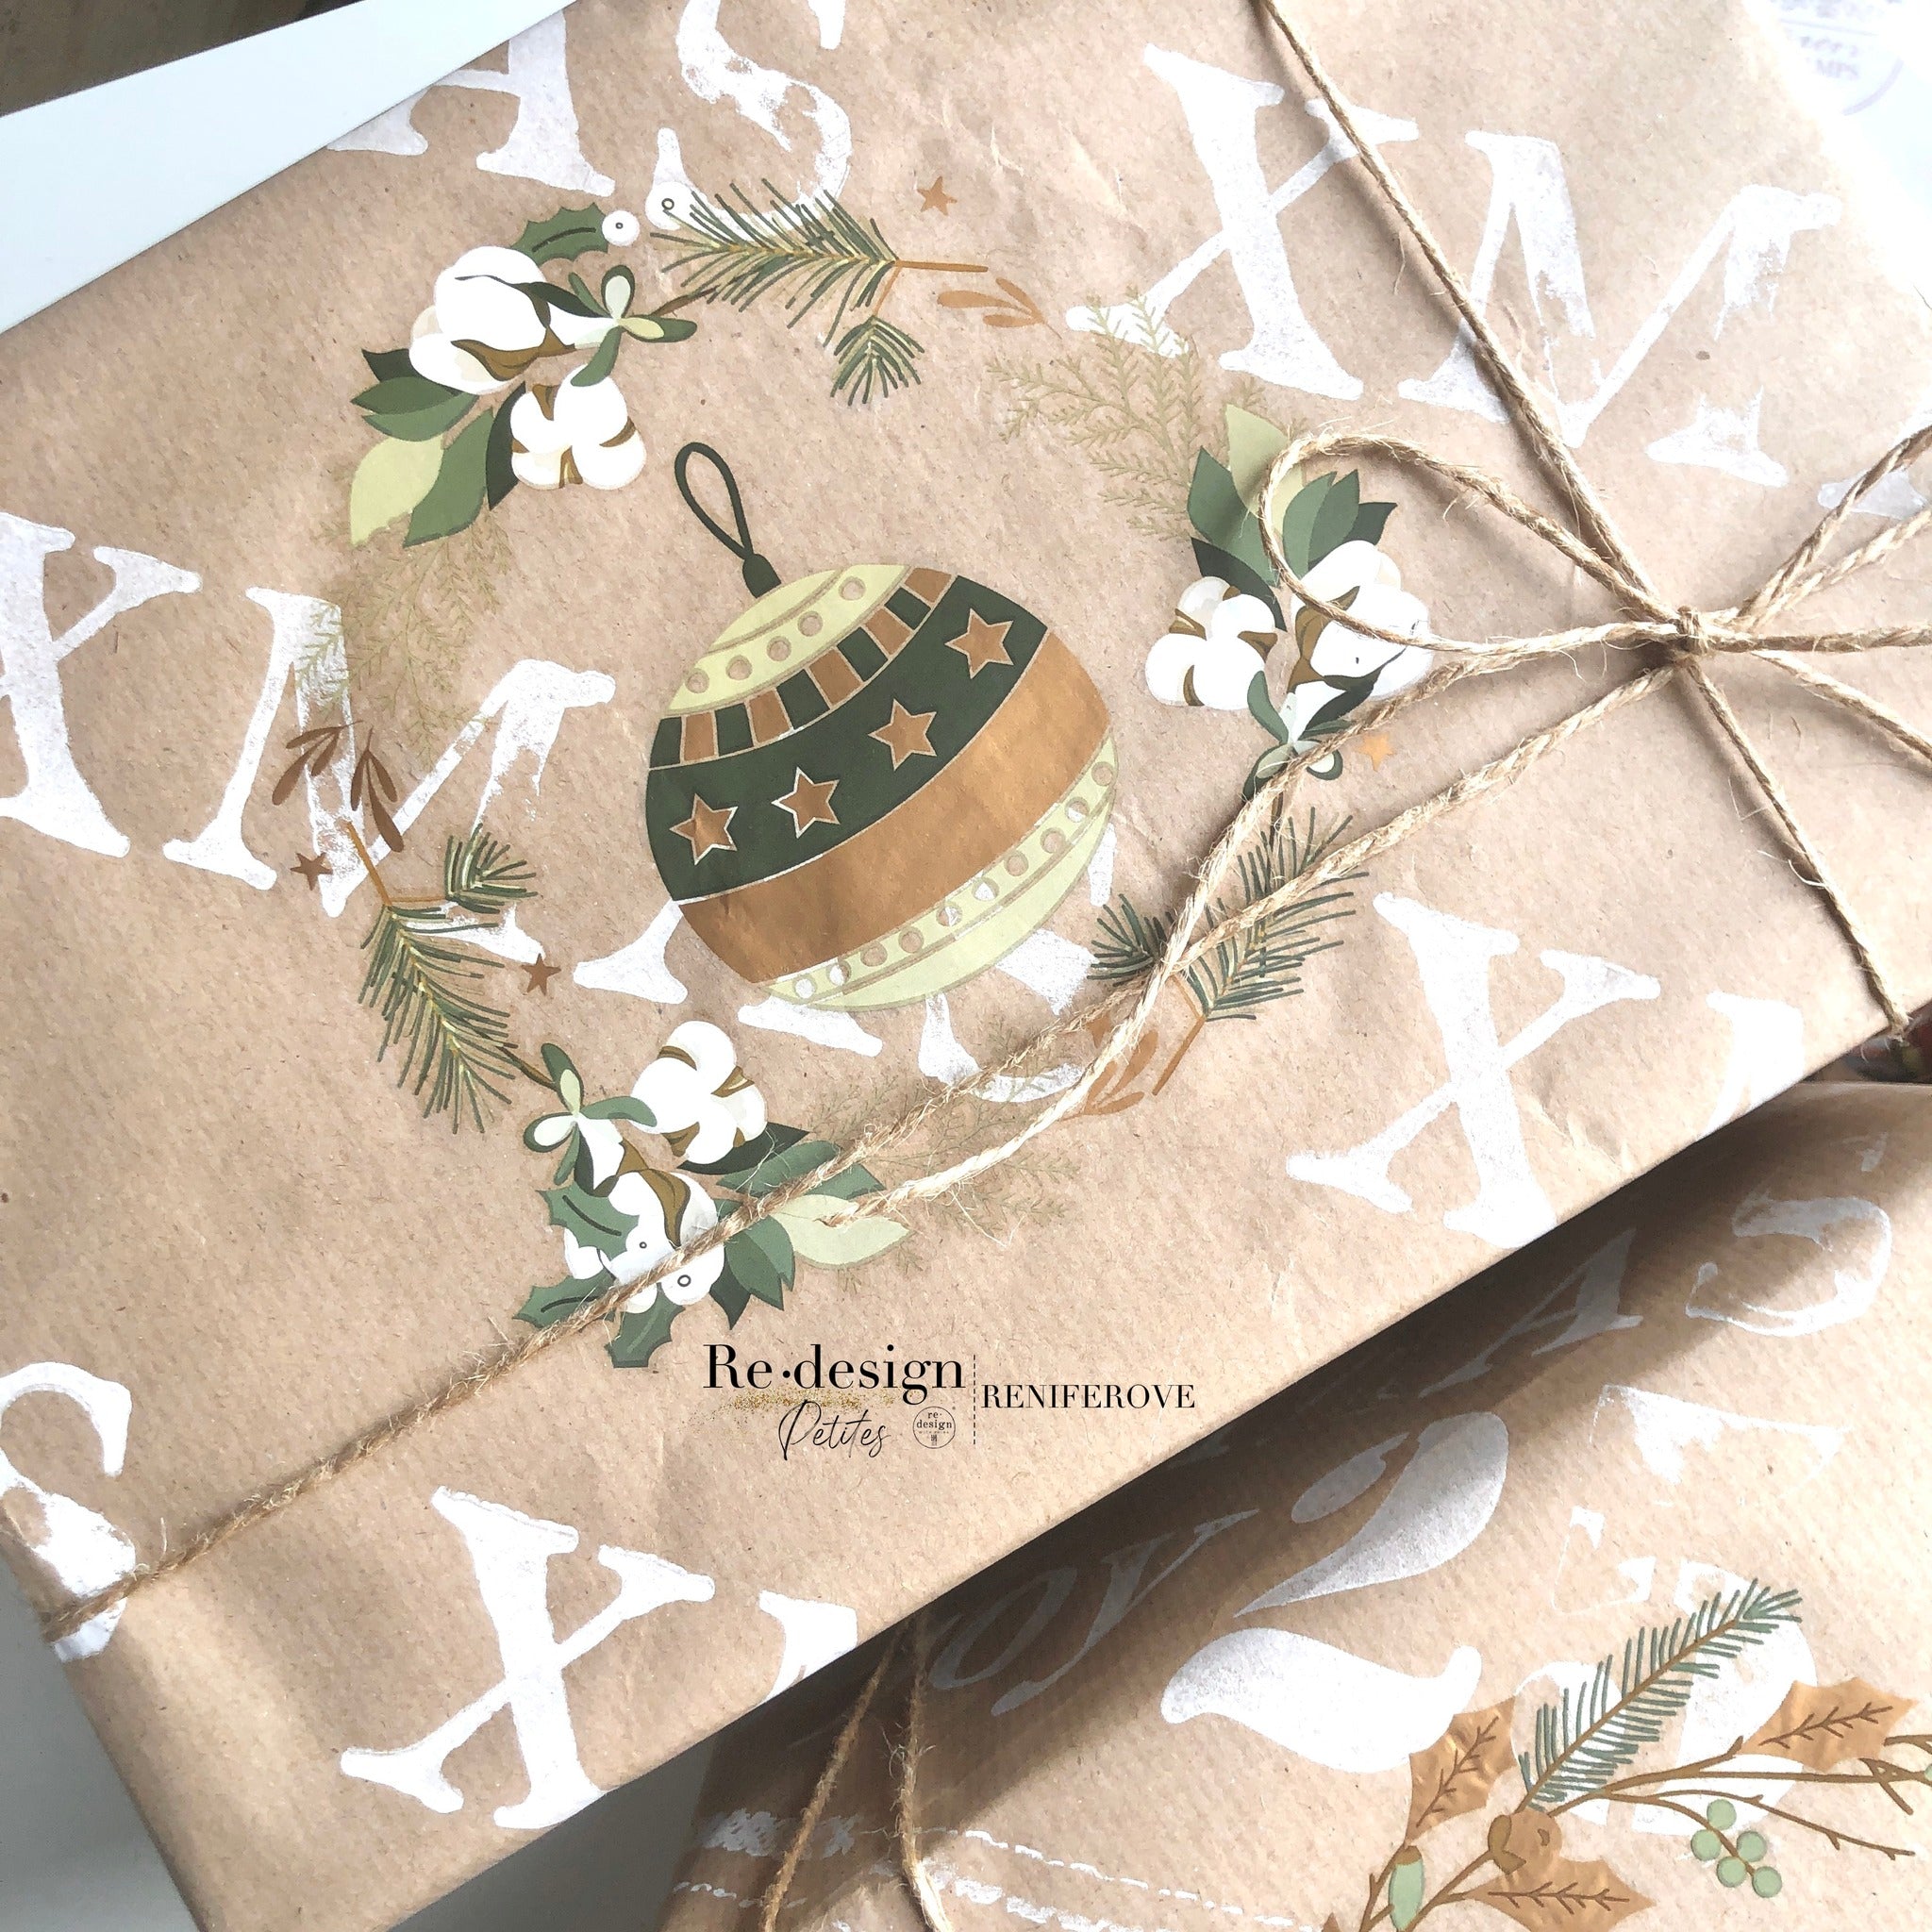 A brown paper wrapped gift created by Reniferove features ReDesign with Prima's Holiday Spirit small transfers on it.